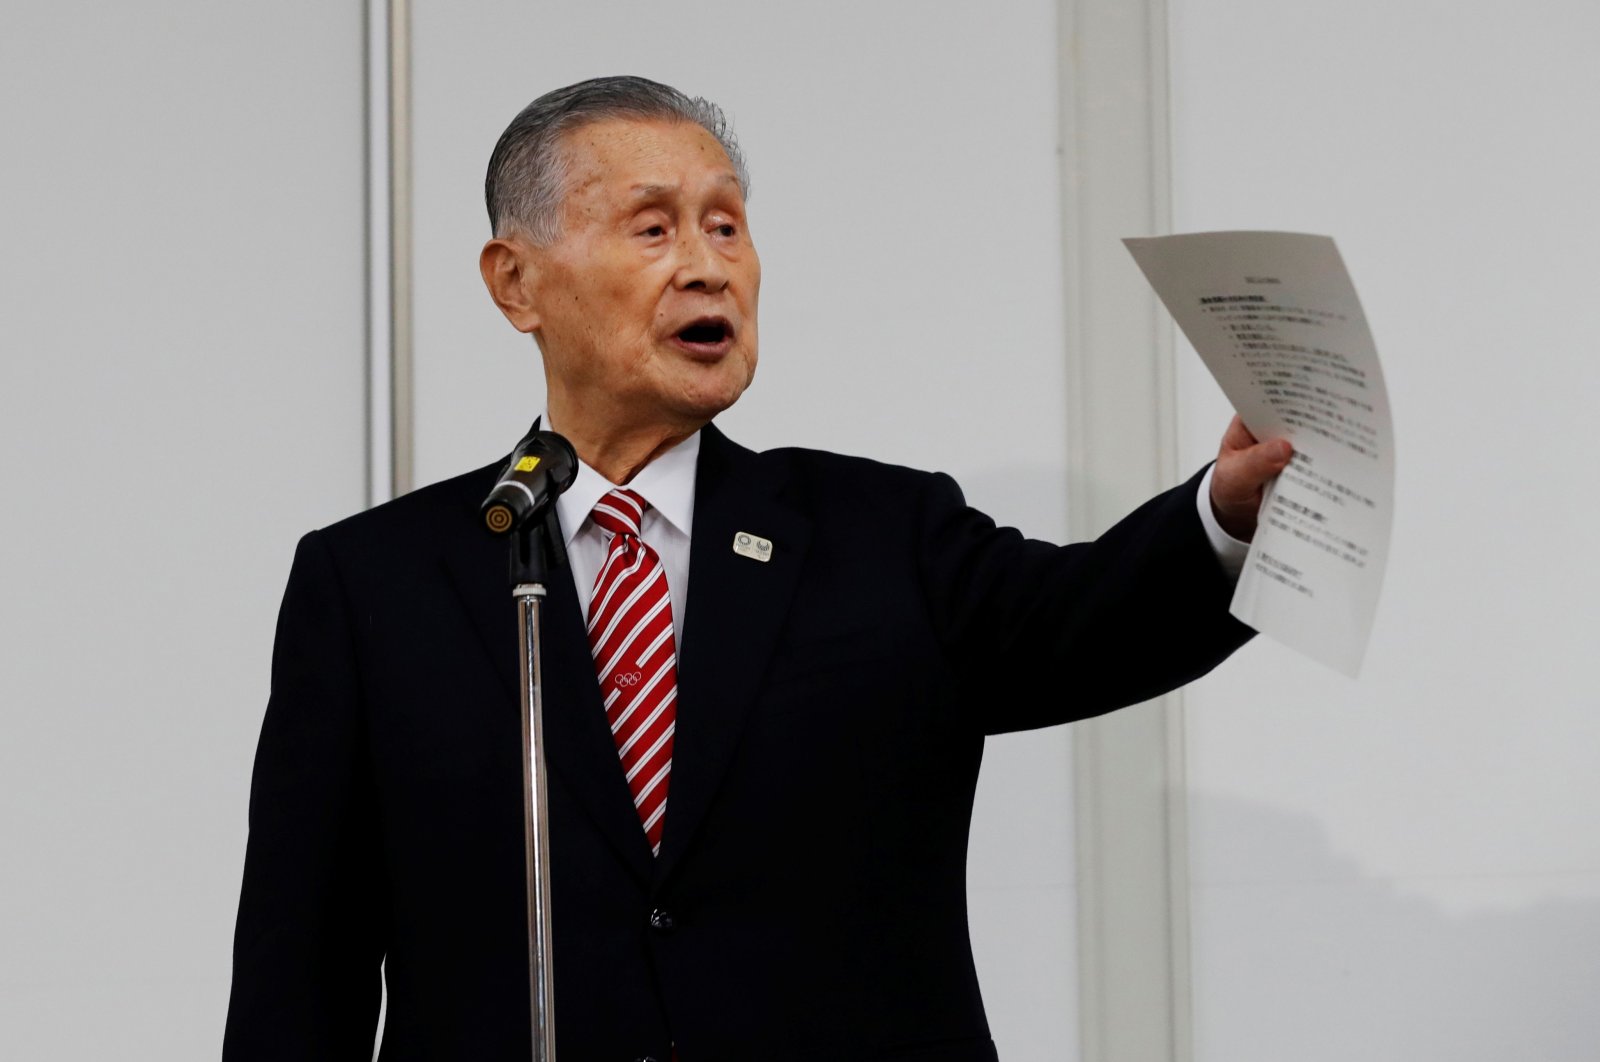 Tokyo 2020 President Yoshiro Mori speaks during a news conference in Tokyo, Japan, Feb. 4, 2021. (AFP Photo)